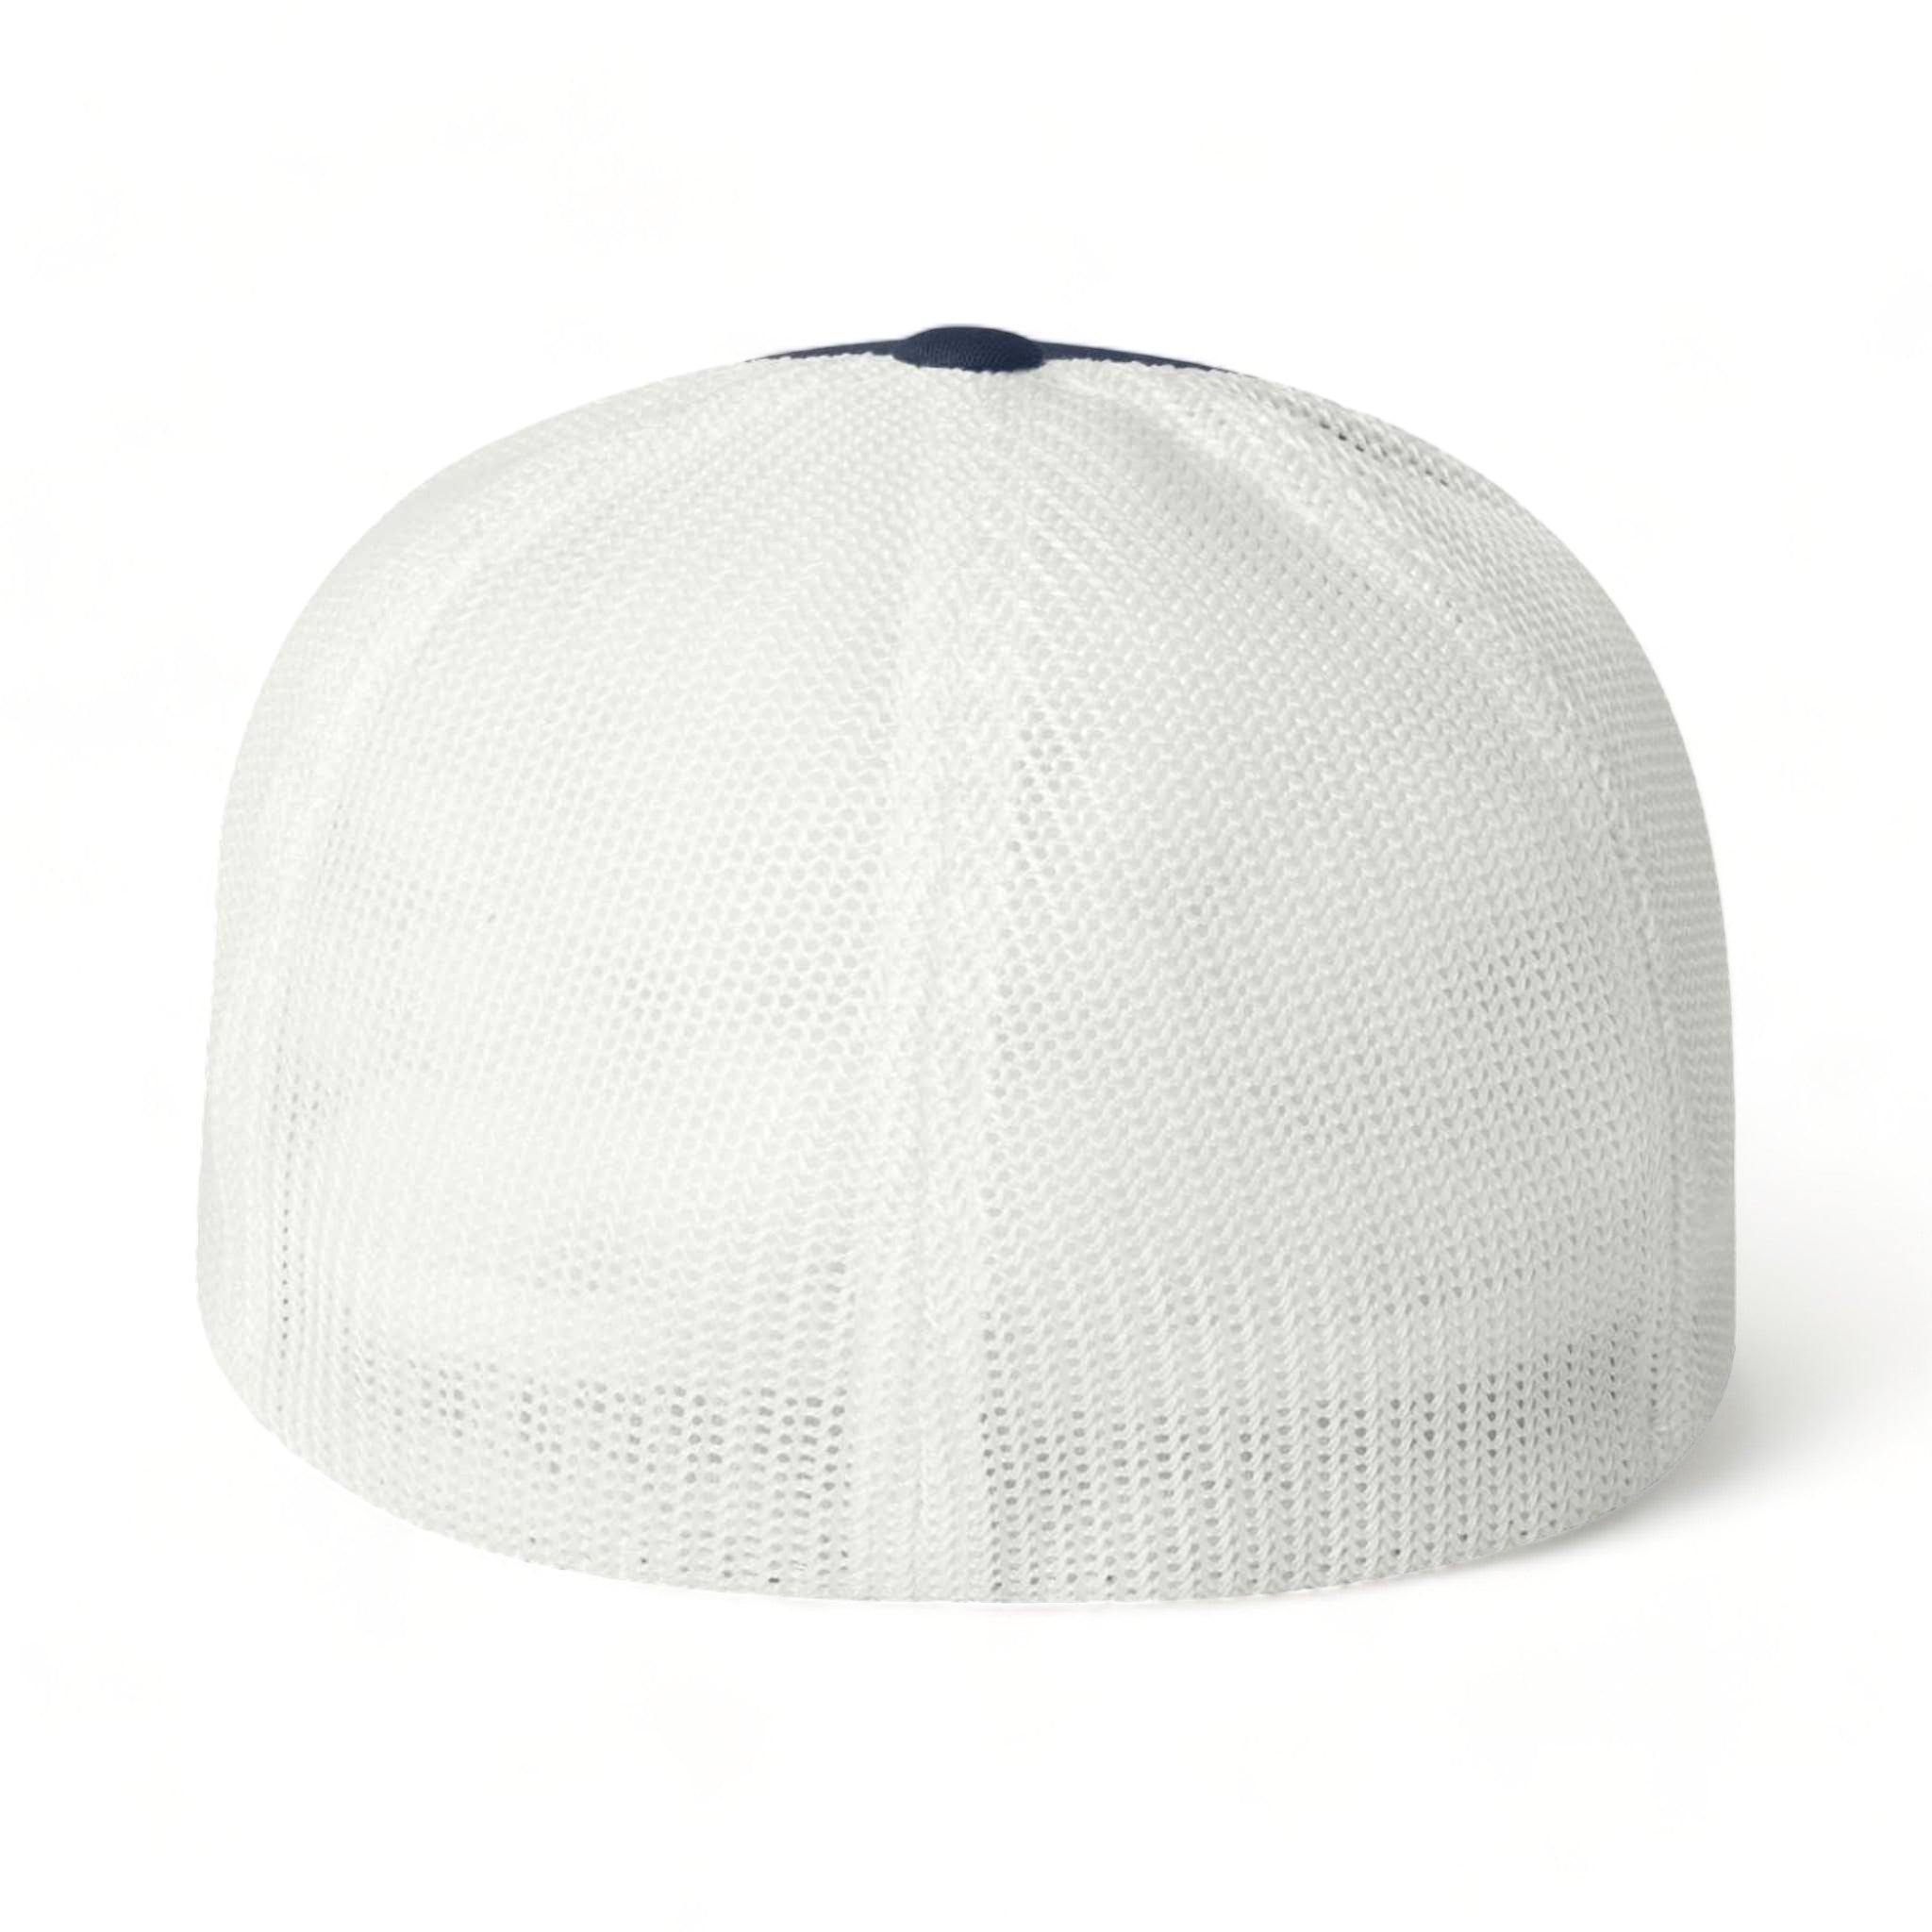 Back view of Flexfit 6511 custom hat in navy and white